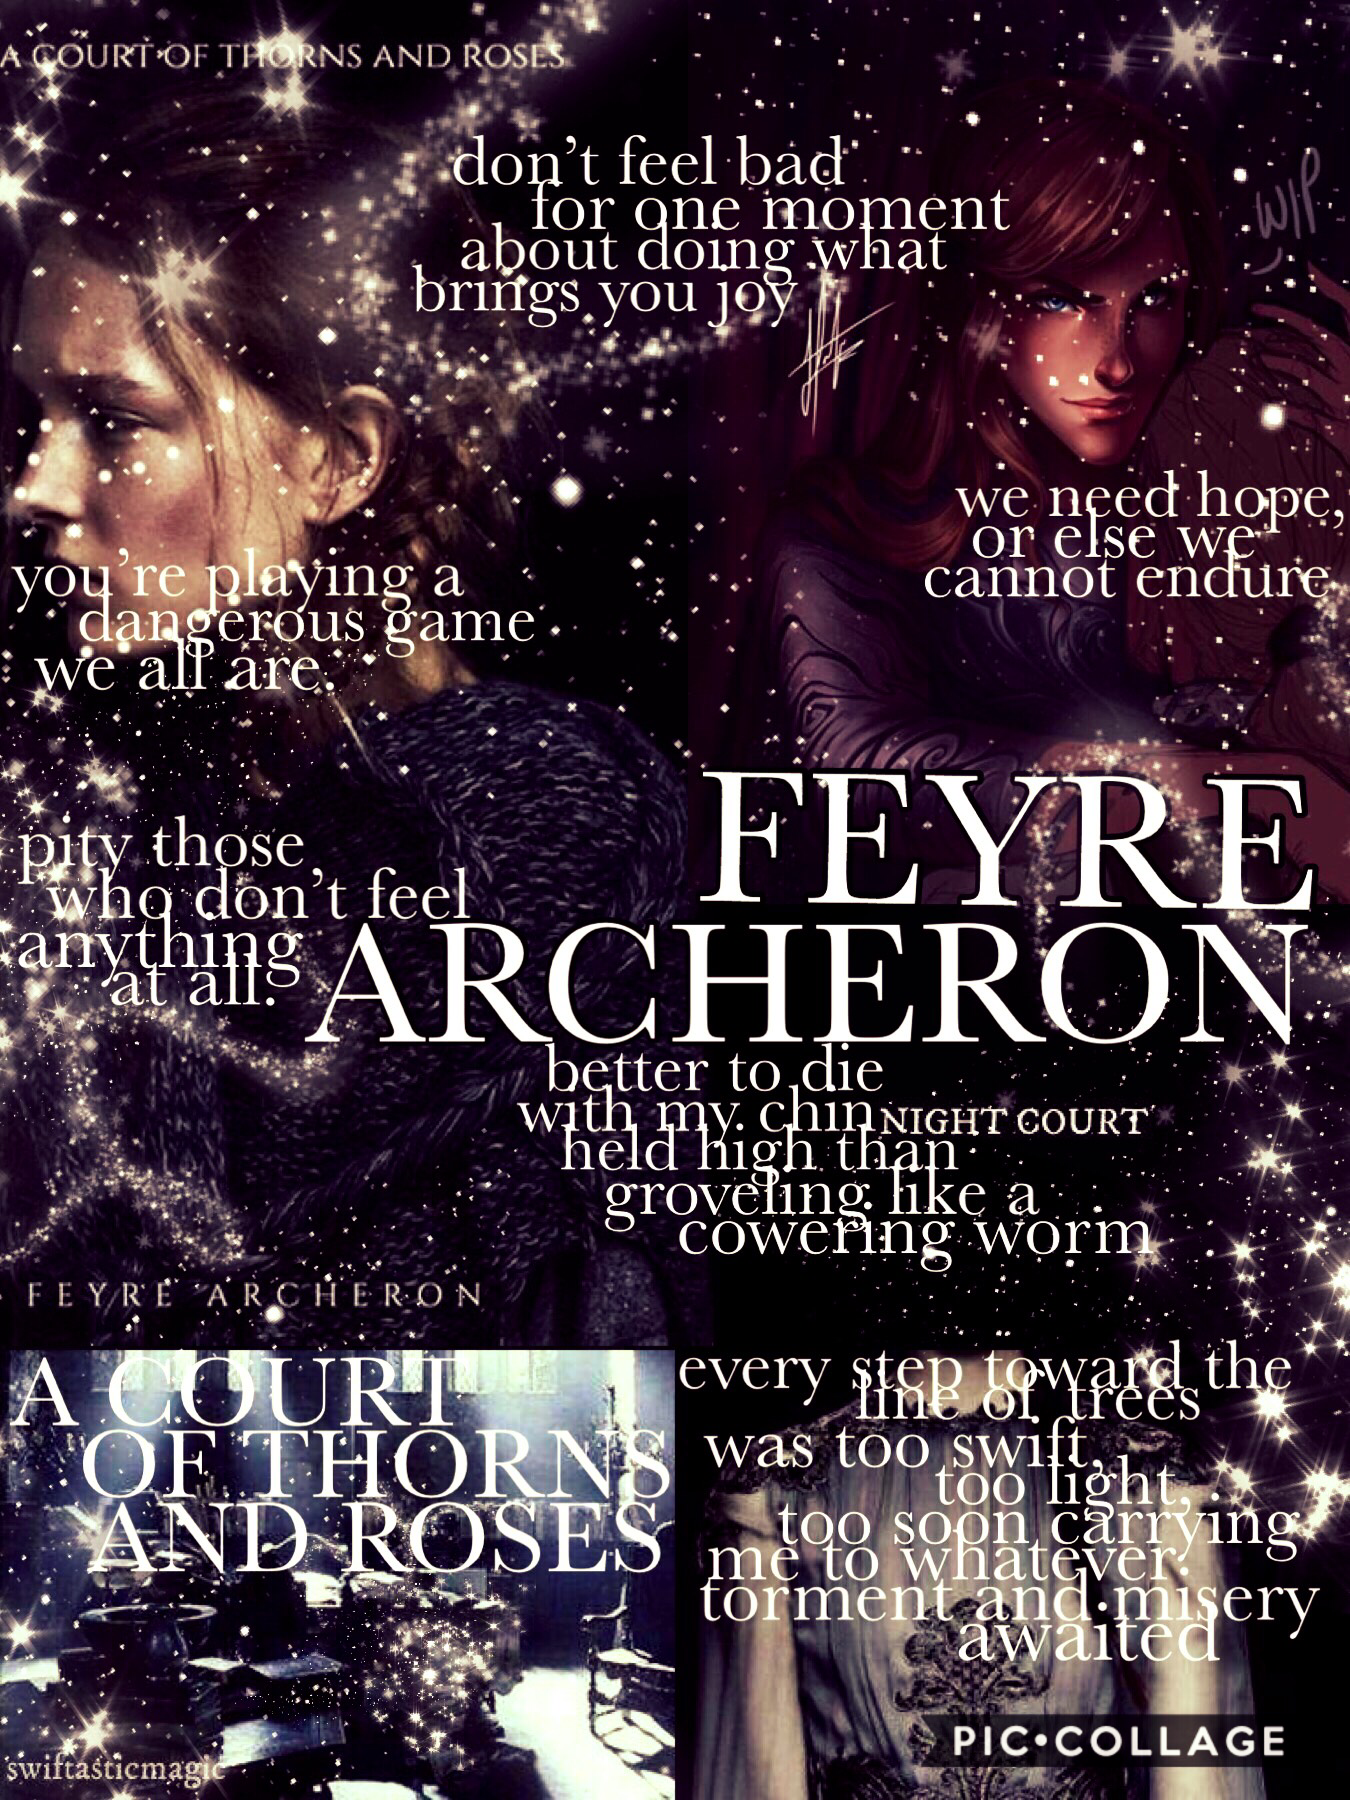 🏹feYRE aRCHerON🏹CHECK REMIXES🏹All quotes from, “A court of Thorns & Roses”🏹gO READ THIS SERIES ITS AMAZING🏹 aYE my French midterms are finally over & boy am I glad🏹Track season is coming up & iM excited🏹
#PCONLY
#FEYRE&RHYS
#ACOTAR
#FRENCH
#TRACK
#ARROWS
